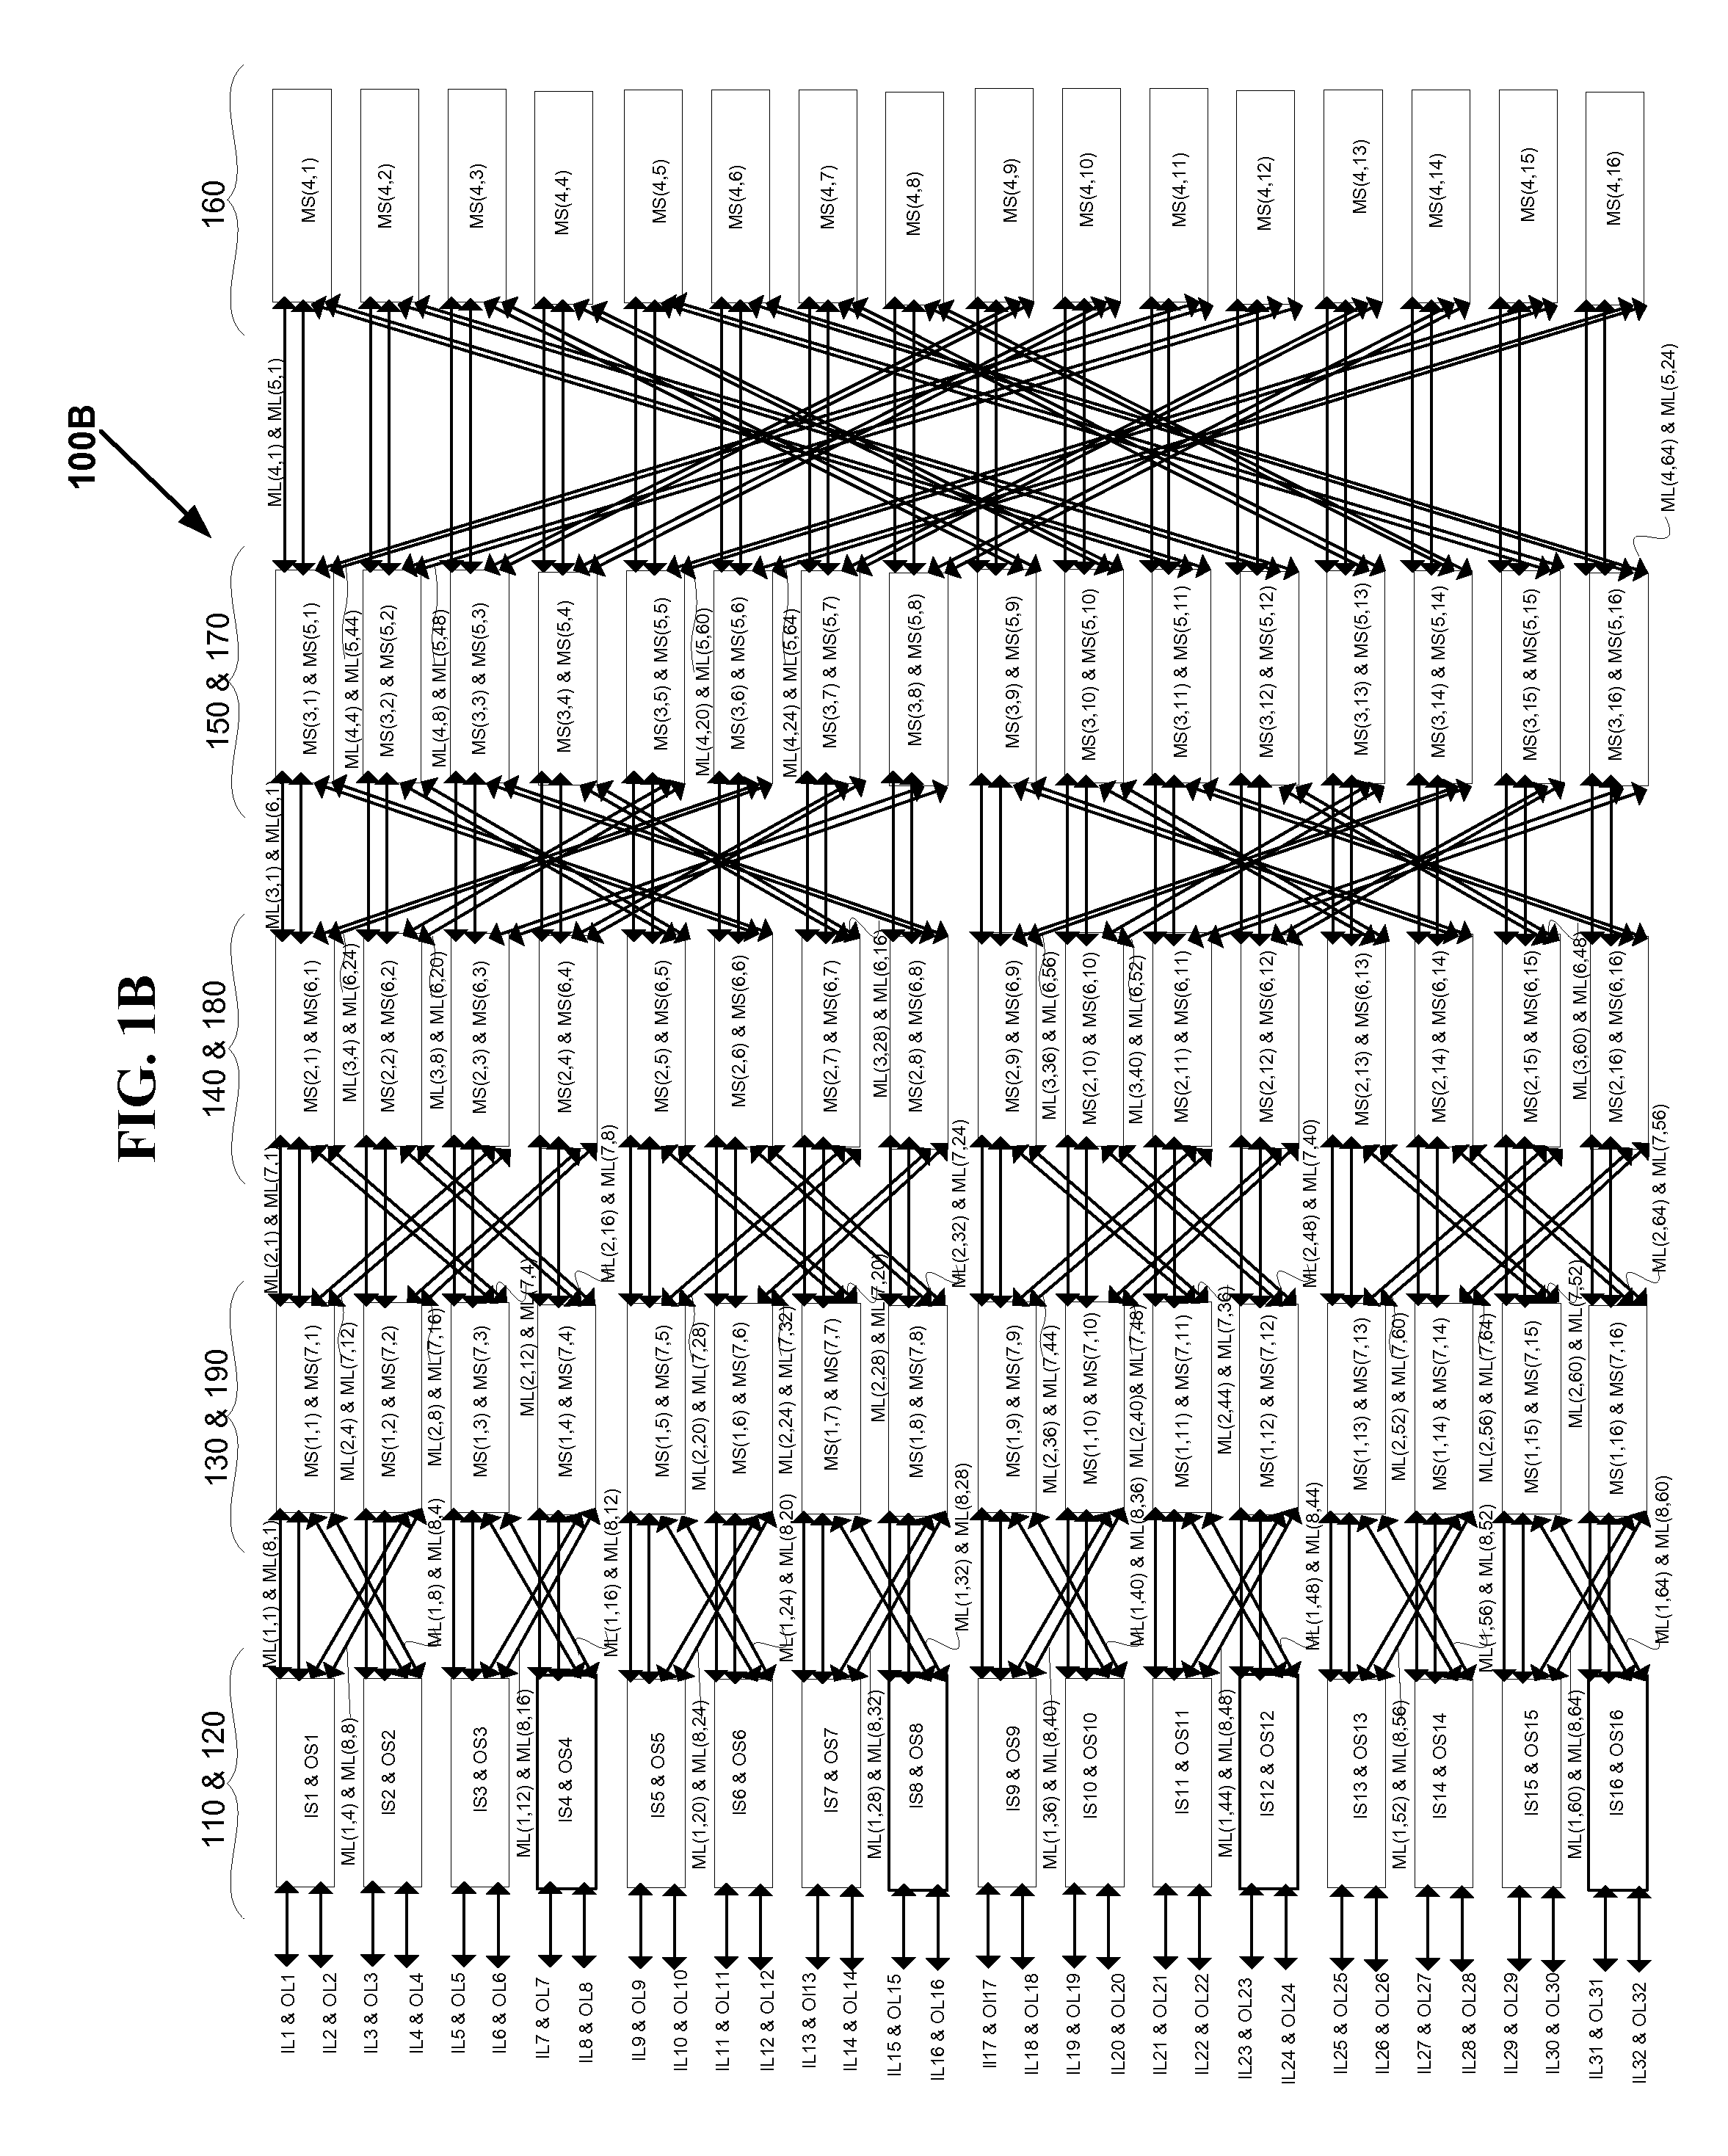 VLSI Layouts of Fully Connected Generalized and Pyramid Networks with Locality Exploitation